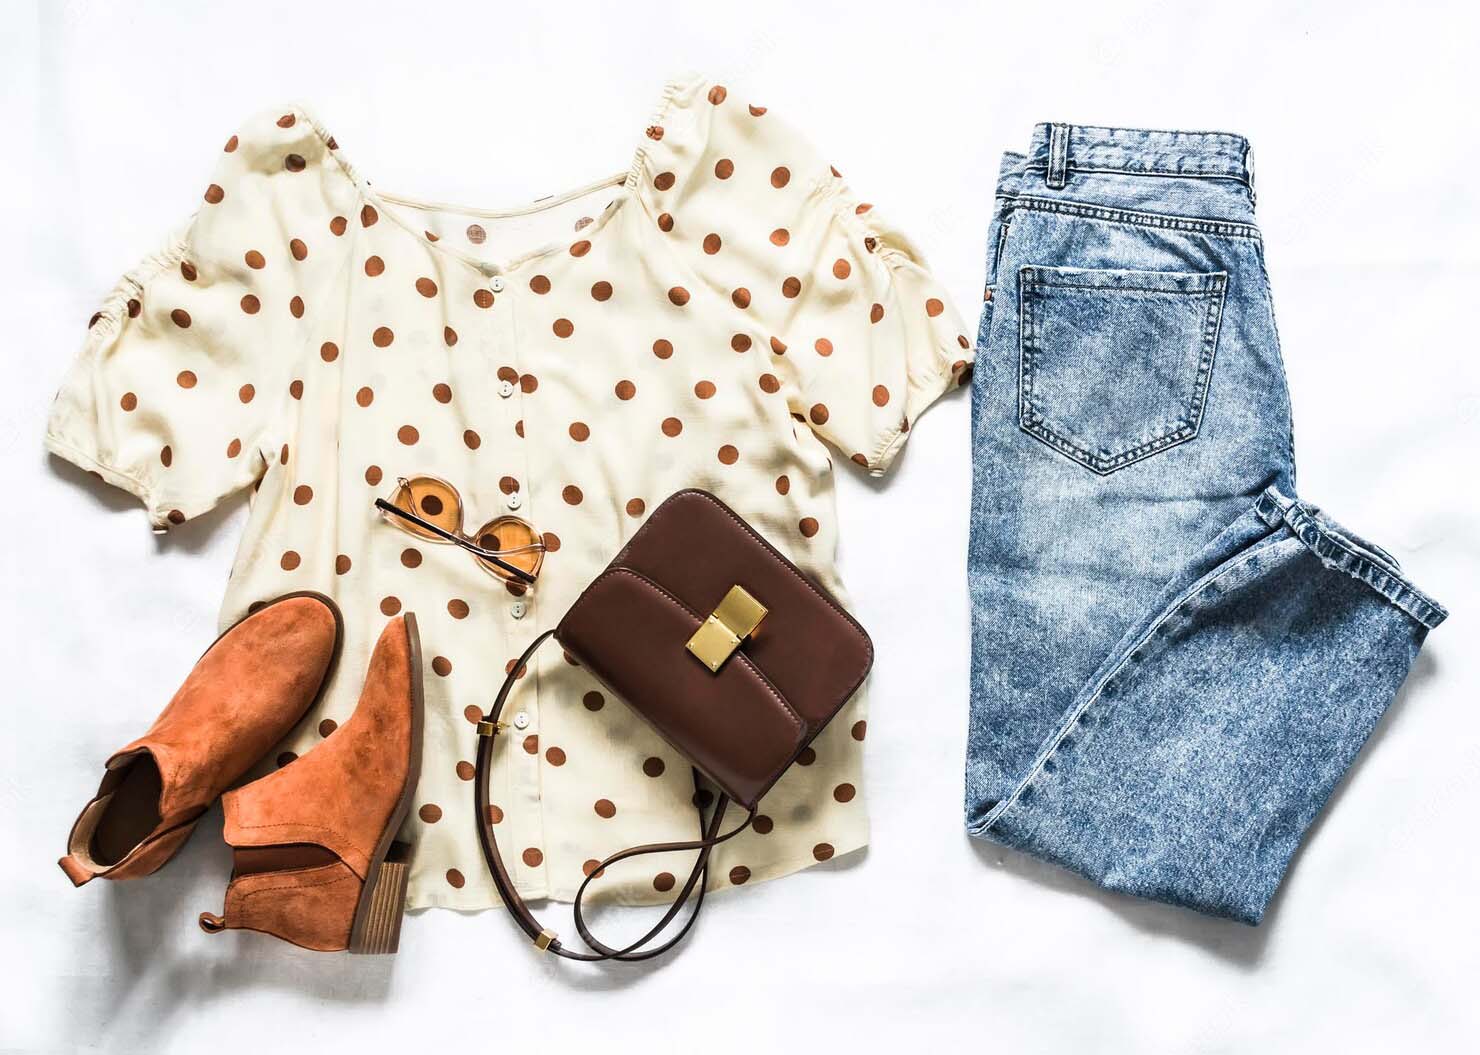 set-women-s-summer-clothes-blue-mom-jeans-polka-dot-blouse-chelsea-boots-cross-body-bag-light-background-top-view